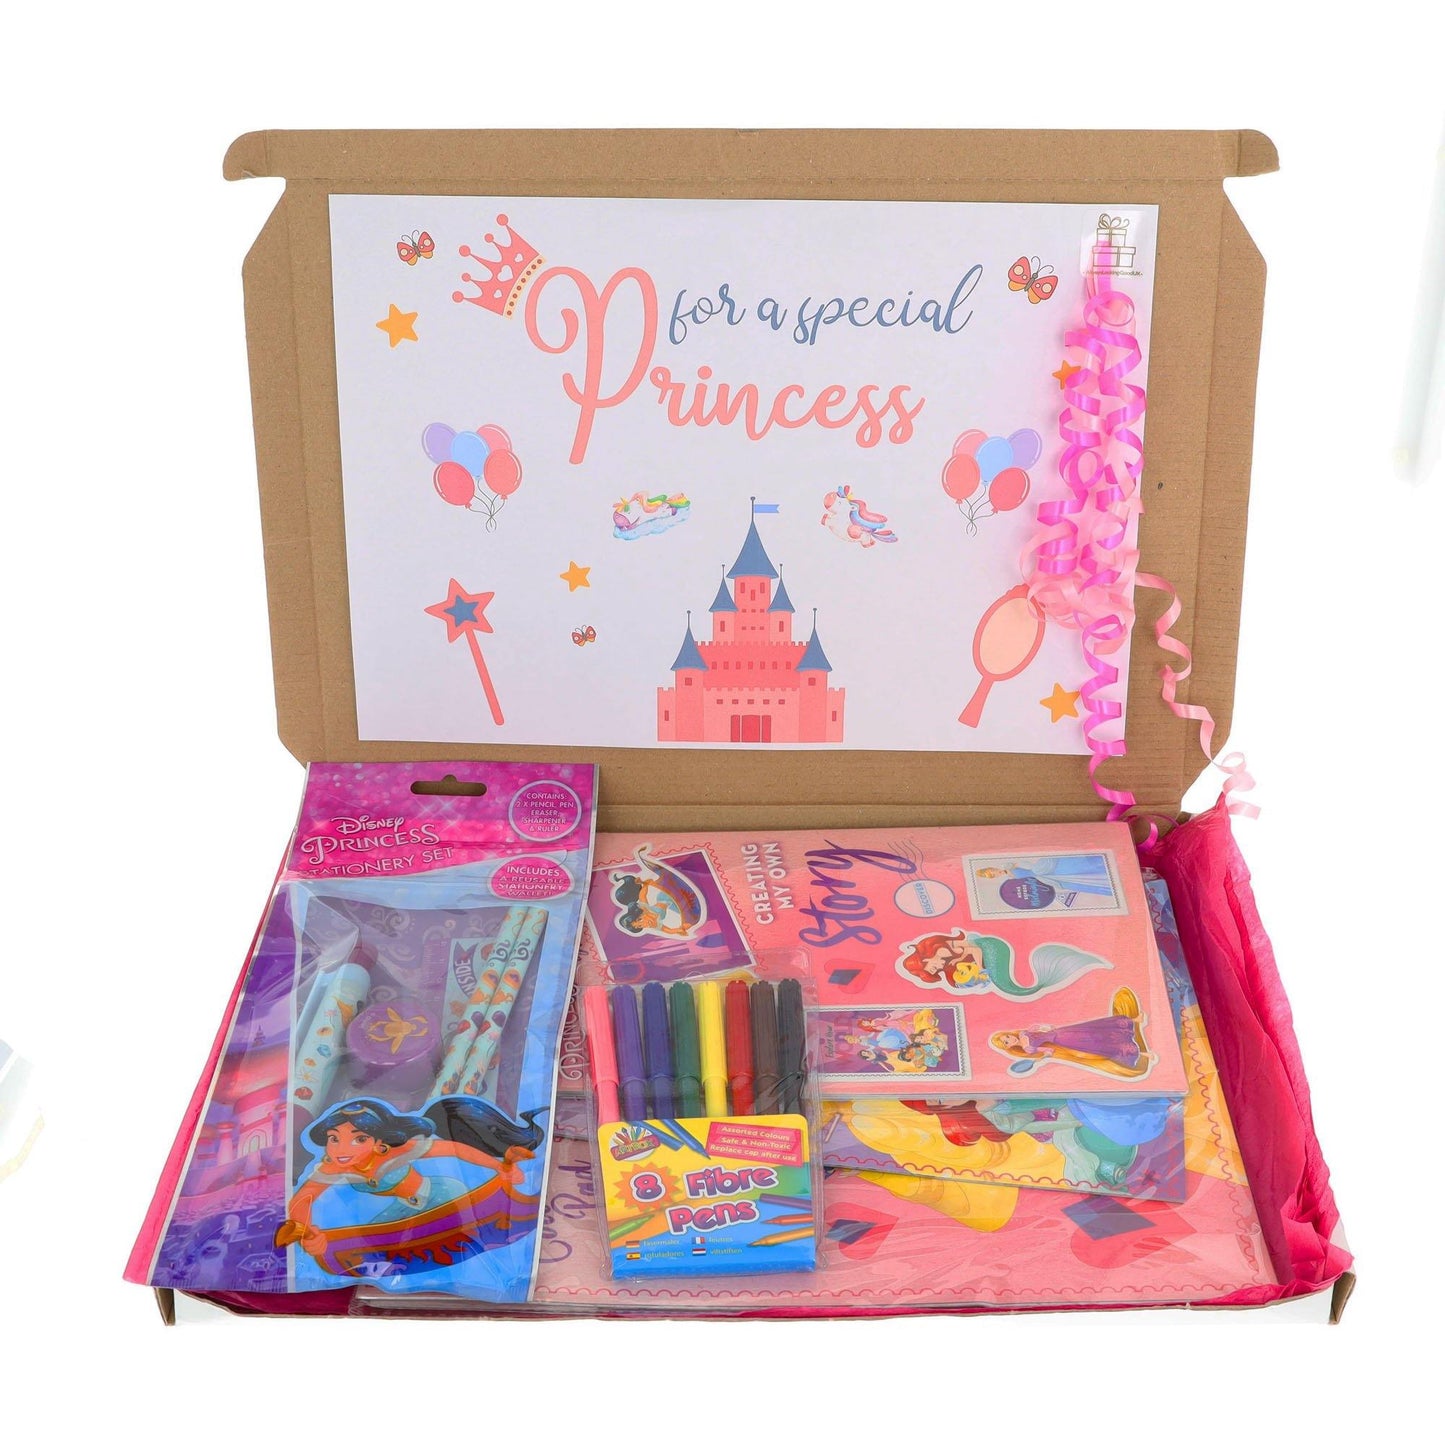 Princess Children's Activity & Bath Time Gift Box  - Always Looking Good - Small Set  